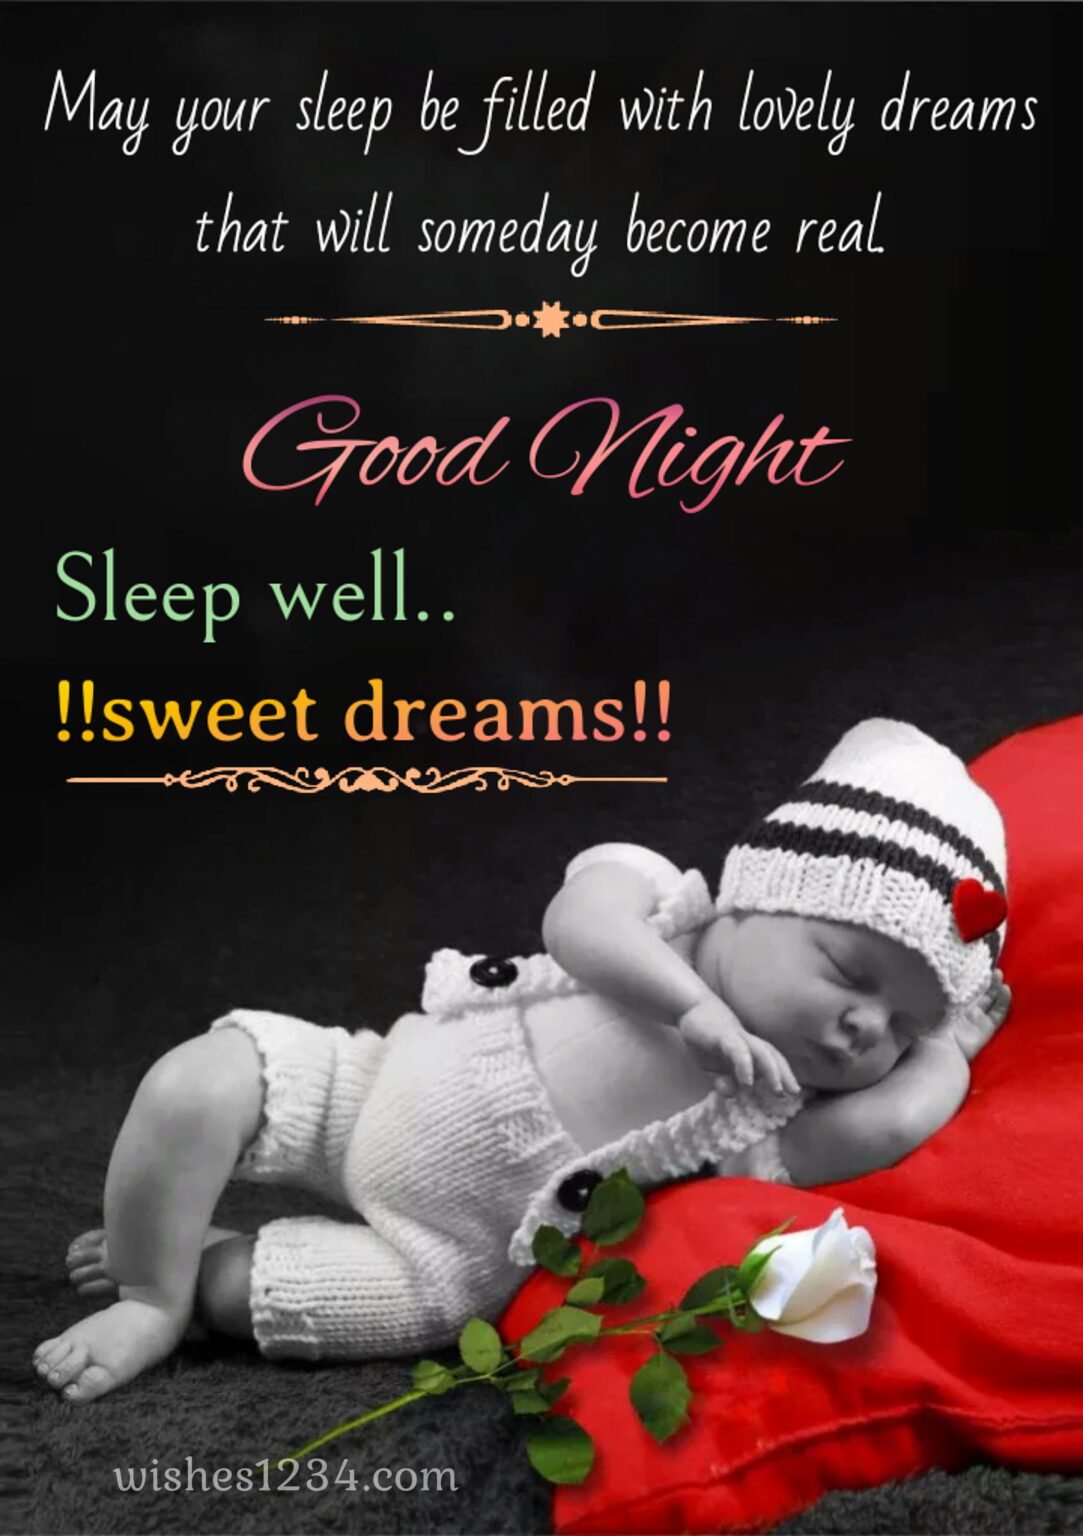 150+ Good Night Messages, Wishes and Quotes